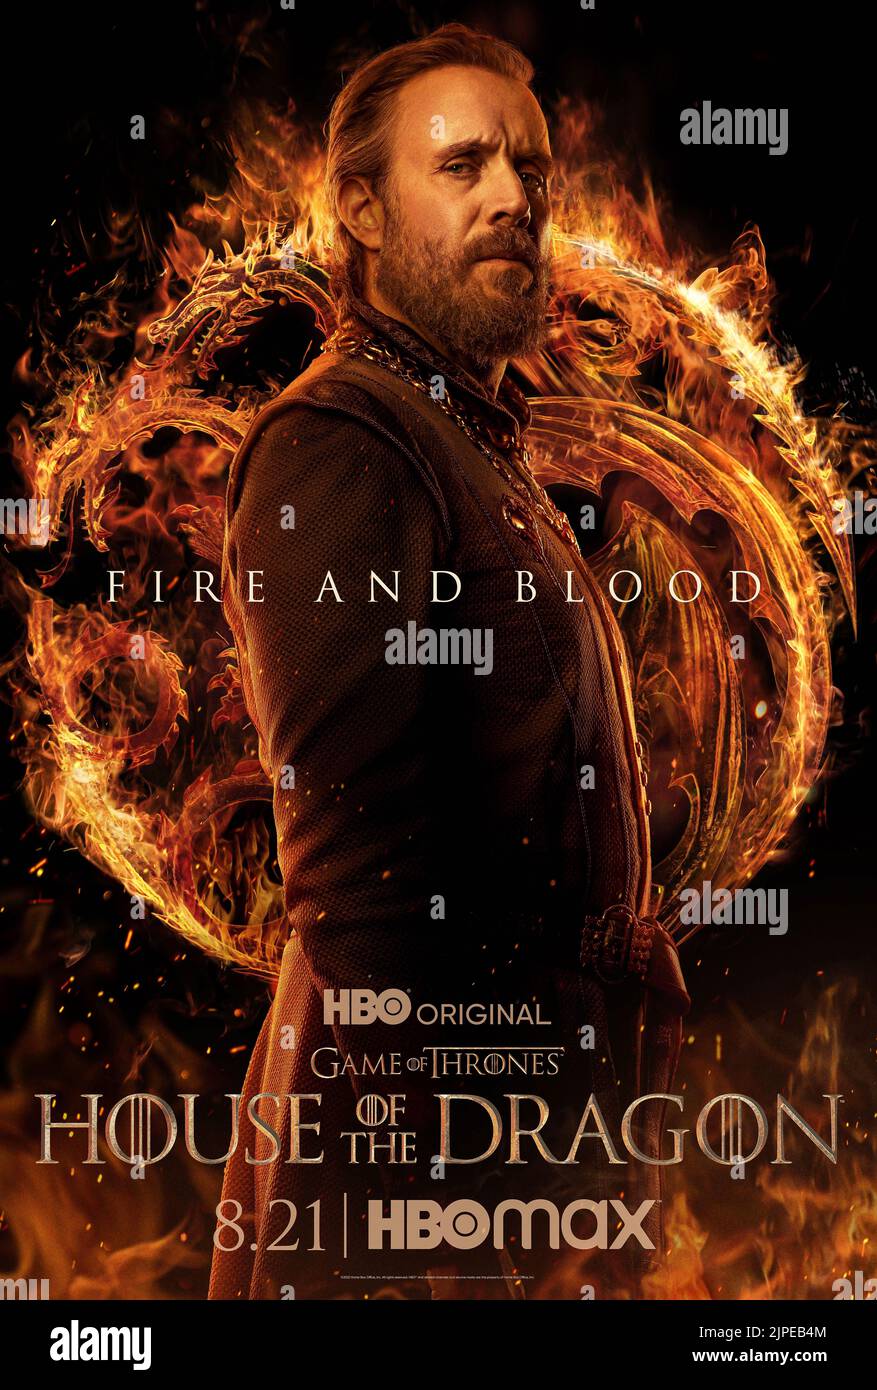 USA. Rhys Ifans in the (C)HBO new series: House of the Dragon (2022).  Plot: The story of the House Targaryen set 300 years before the events of Game of Thrones (2011).  Ref: LMK106-J8255-150822 Supplied by LMKMEDIA. Editorial Only. Landmark Media is not the copyright owner of these Film or TV stills but provides a service only for recognised Media outlets. pictures@lmkmedia.com Stock Photo